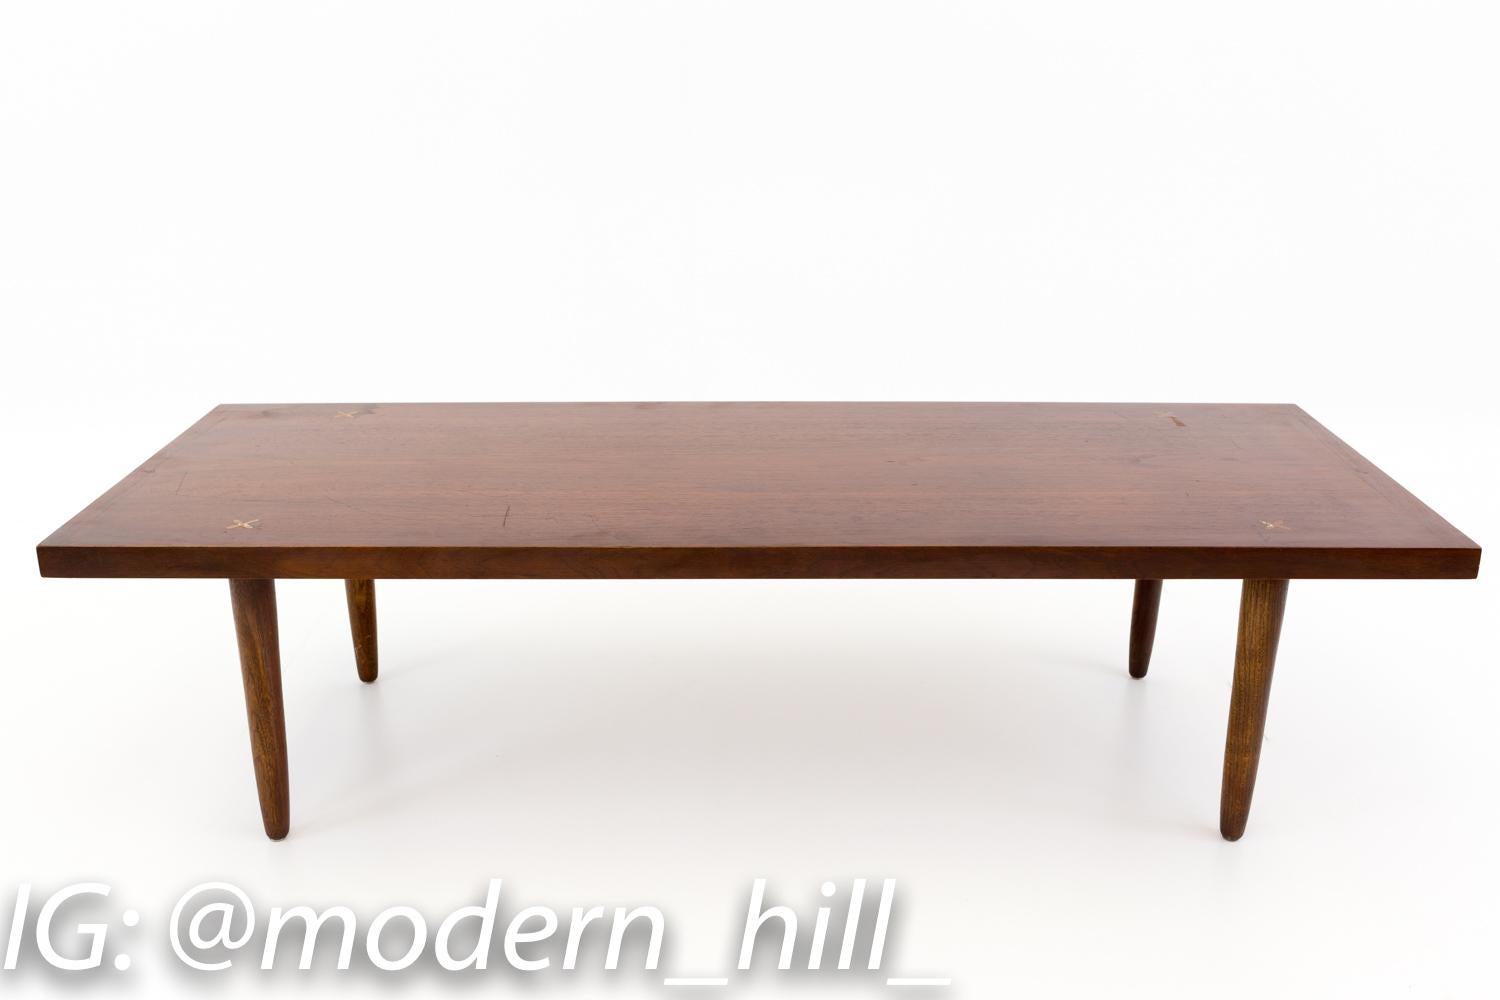 Merton Gershun for American of Martinsville Mid Century X inlaid coffee table or bench

This table measures: 54 wide x 20.5 deep x 14.25 high

All pieces of furniture can be had in what we call restored vintage condition. That means the piece is